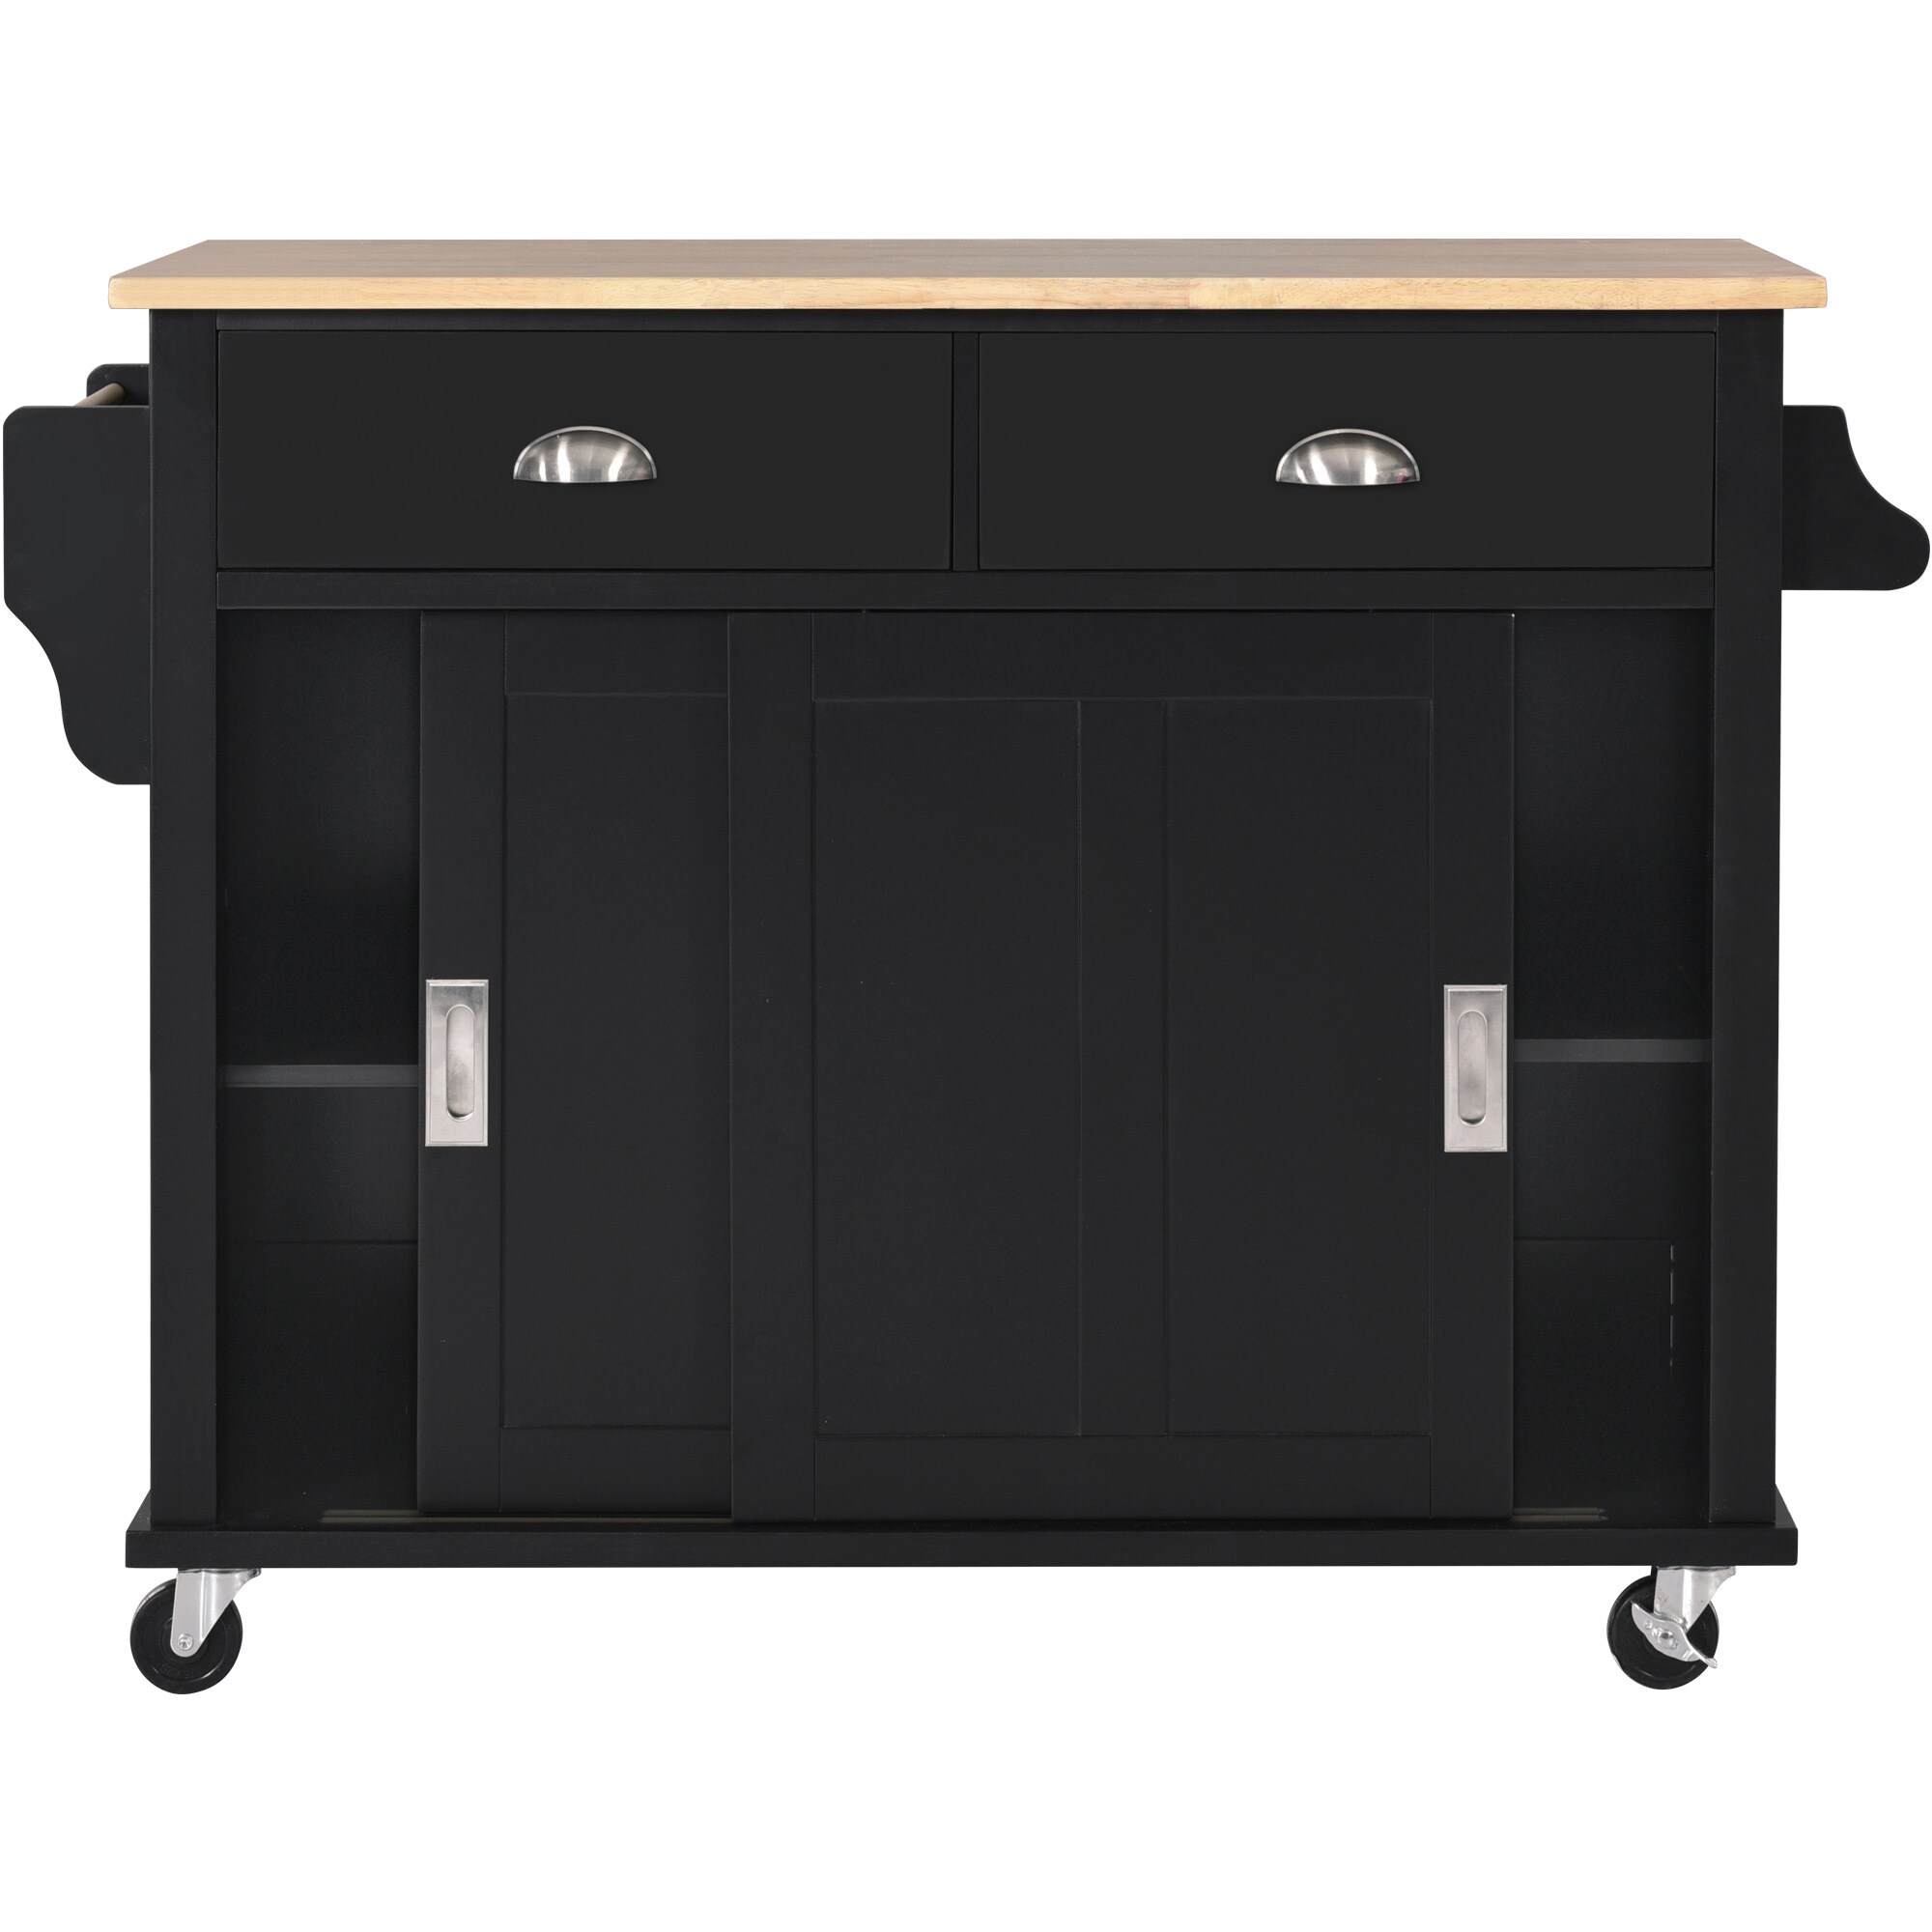 BABOOM Black Mdf Base with Wood Top Rolling Kitchen Island (20.5-in x ...